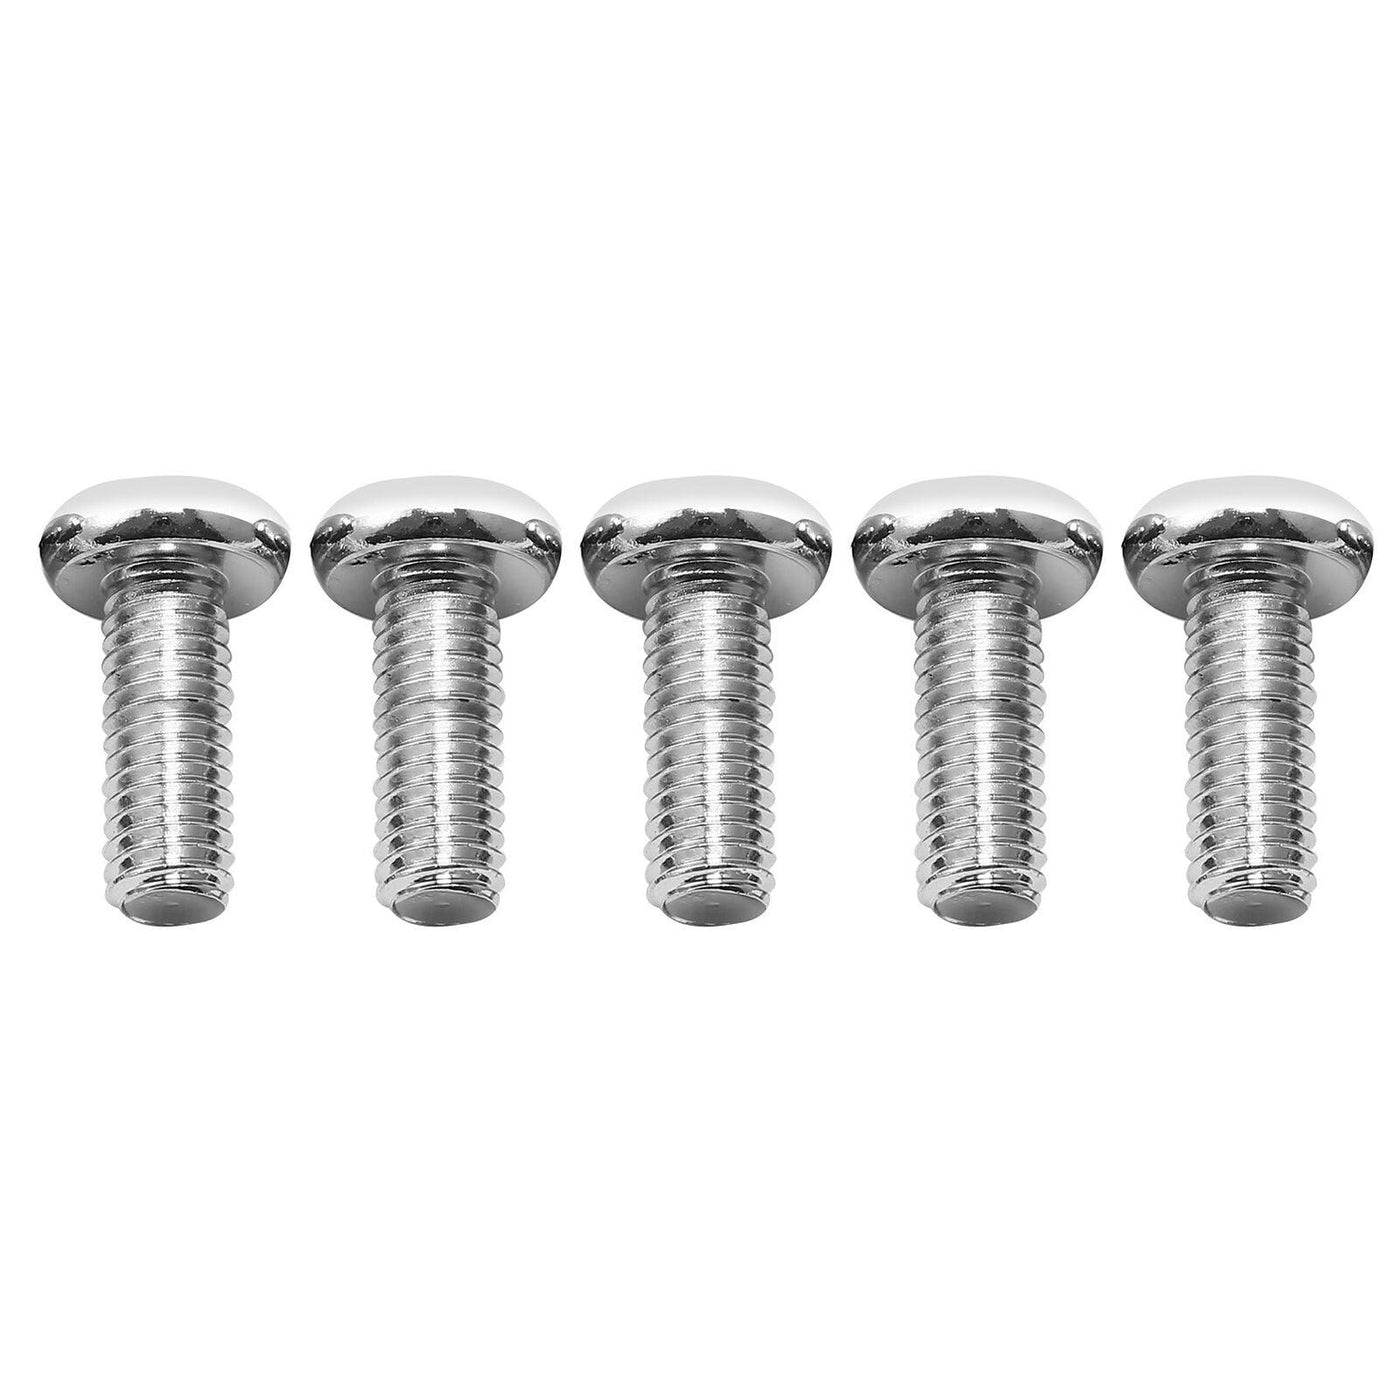 5x Rear Disk Brake Rotor Bolts Fit For Harley Softail Sportster XL Electra Glide - Moto Life Products